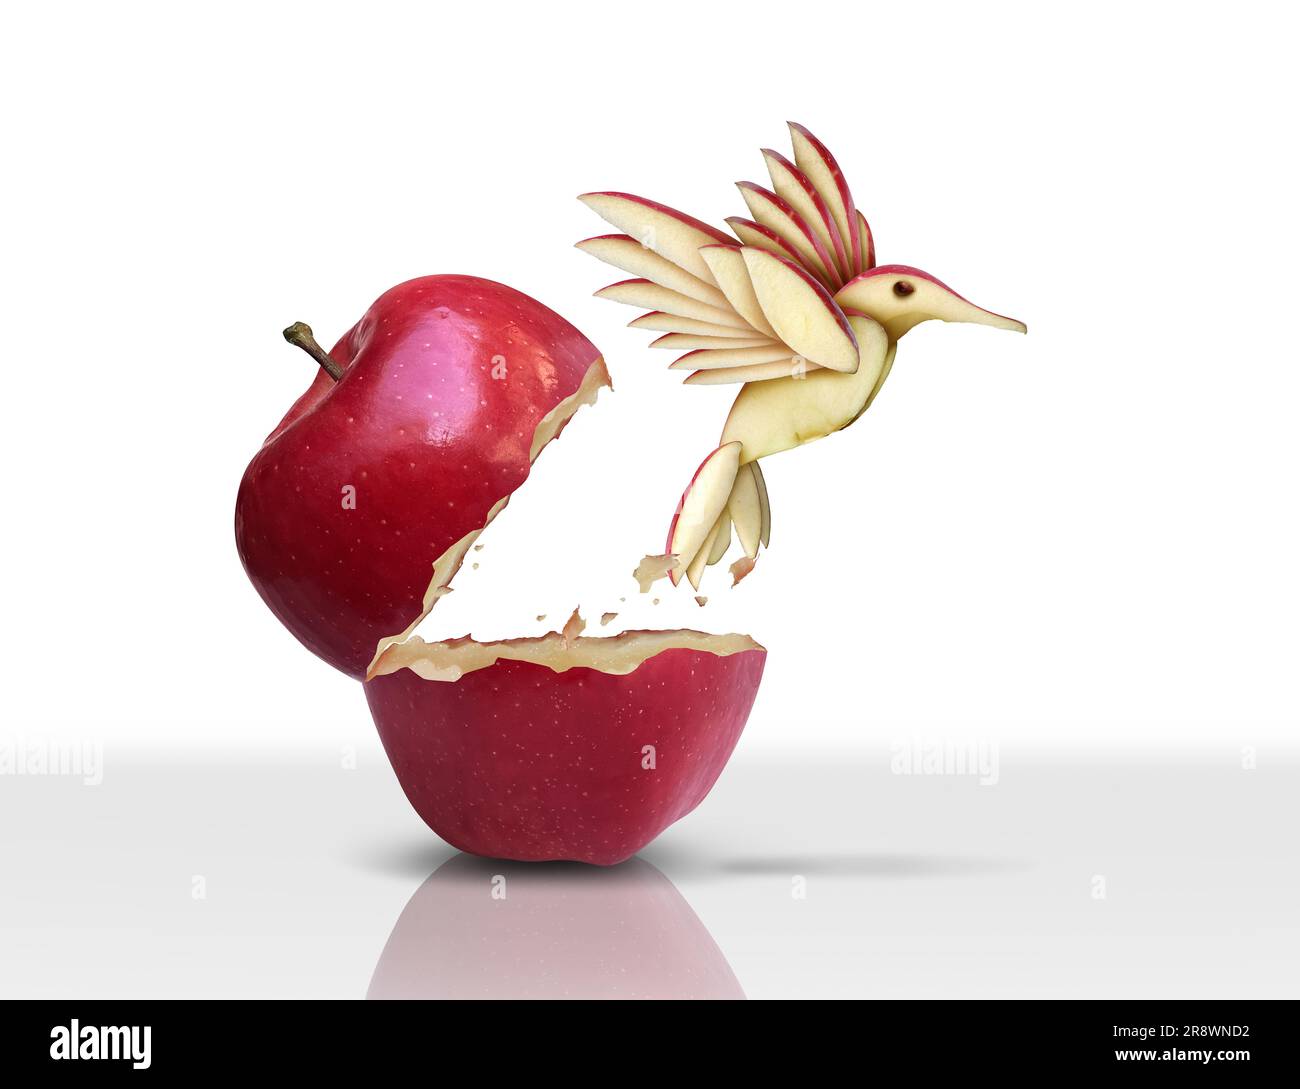 Innovative Breakthrough concept as a red apple transforming through innovation and evolution into a flying bird as a business metaphor. Stock Photo